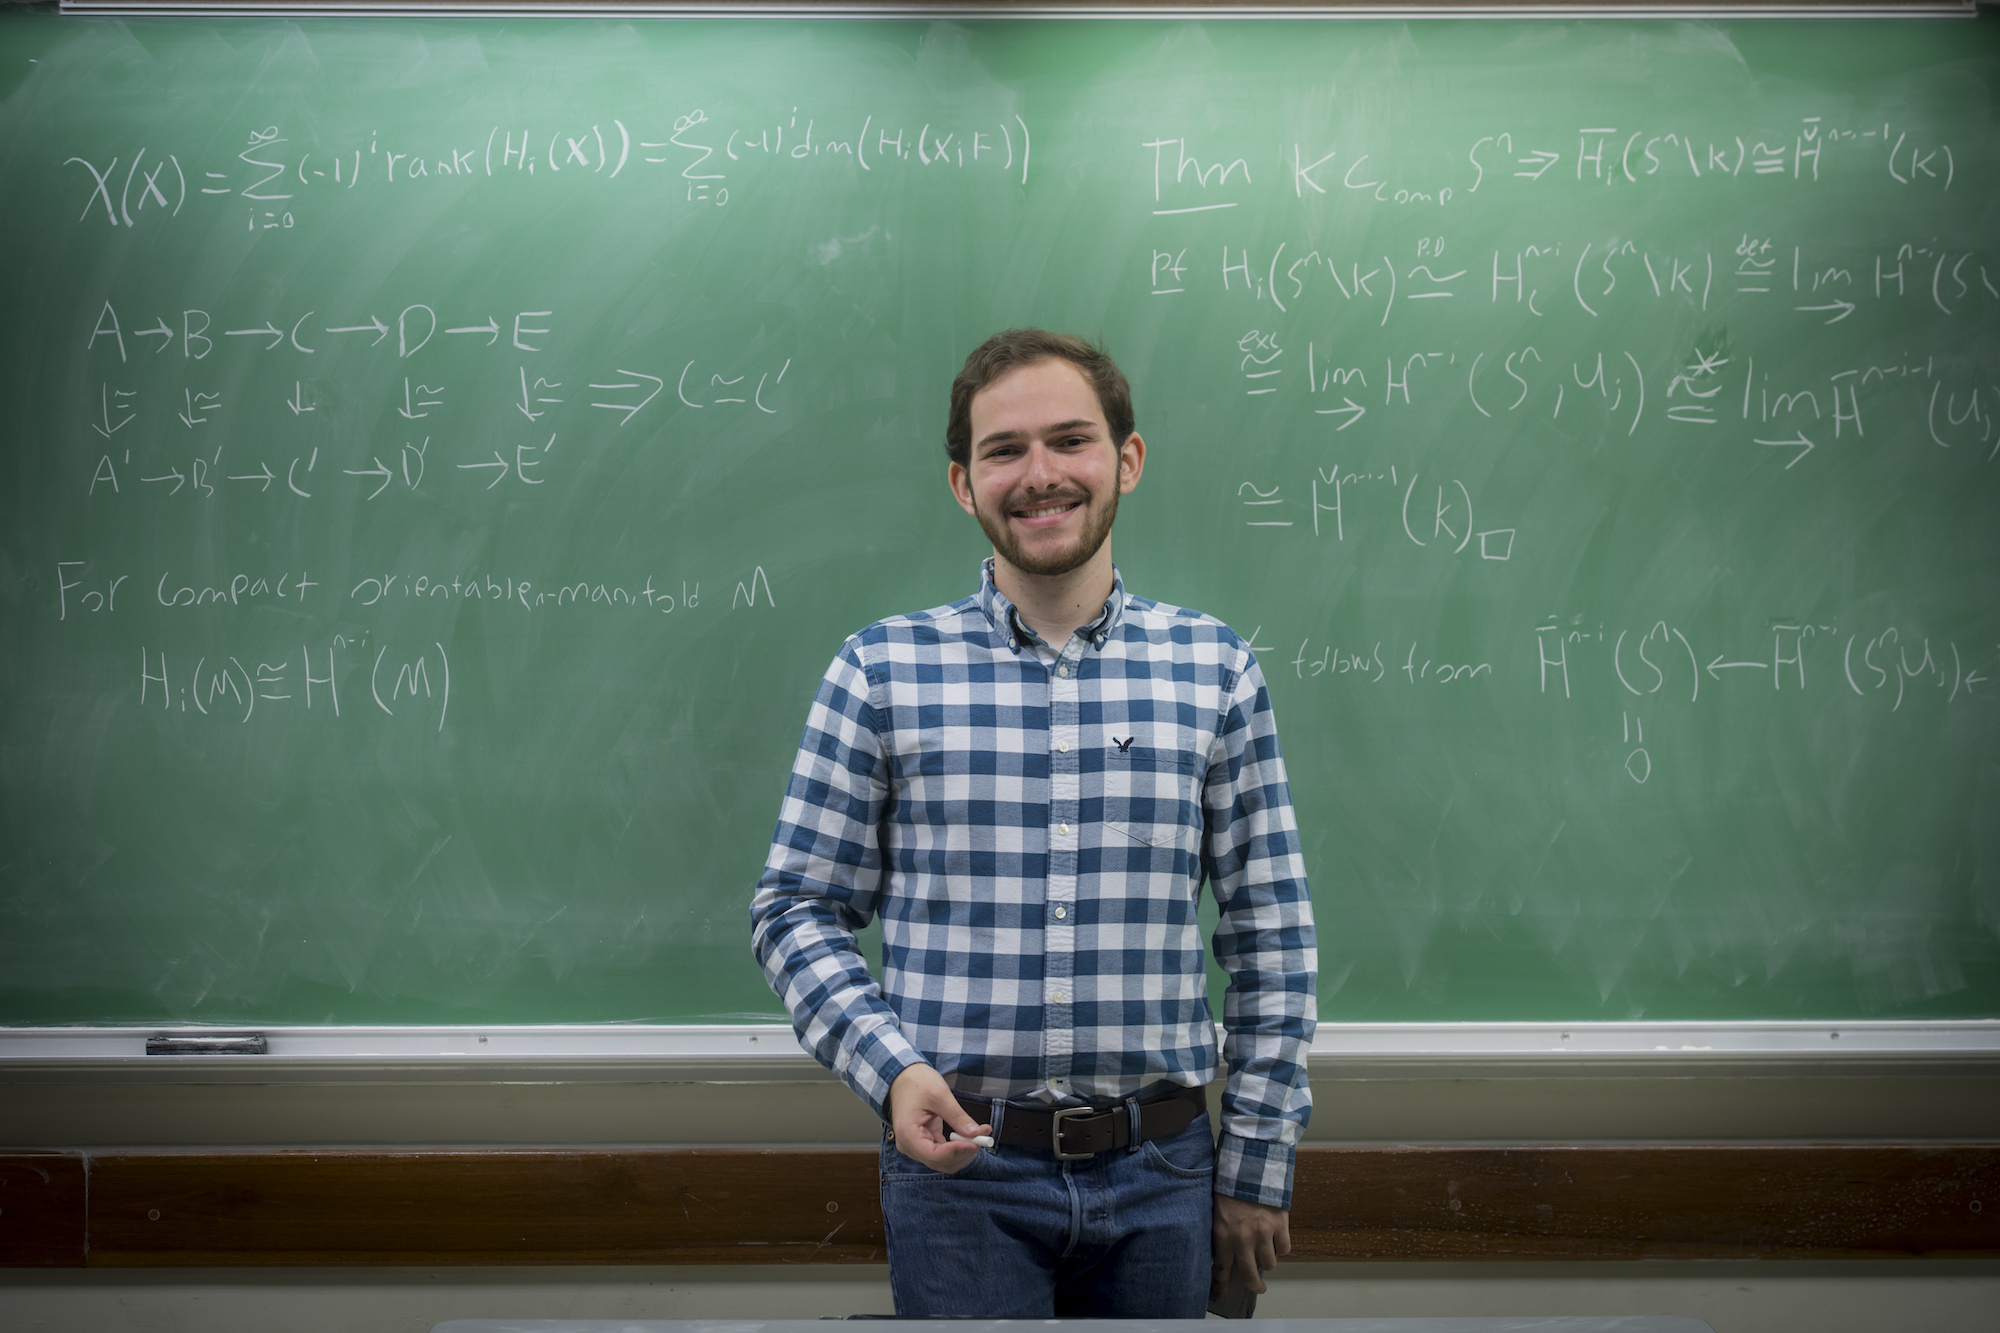 young man standing in front of green chalkboard with math equations